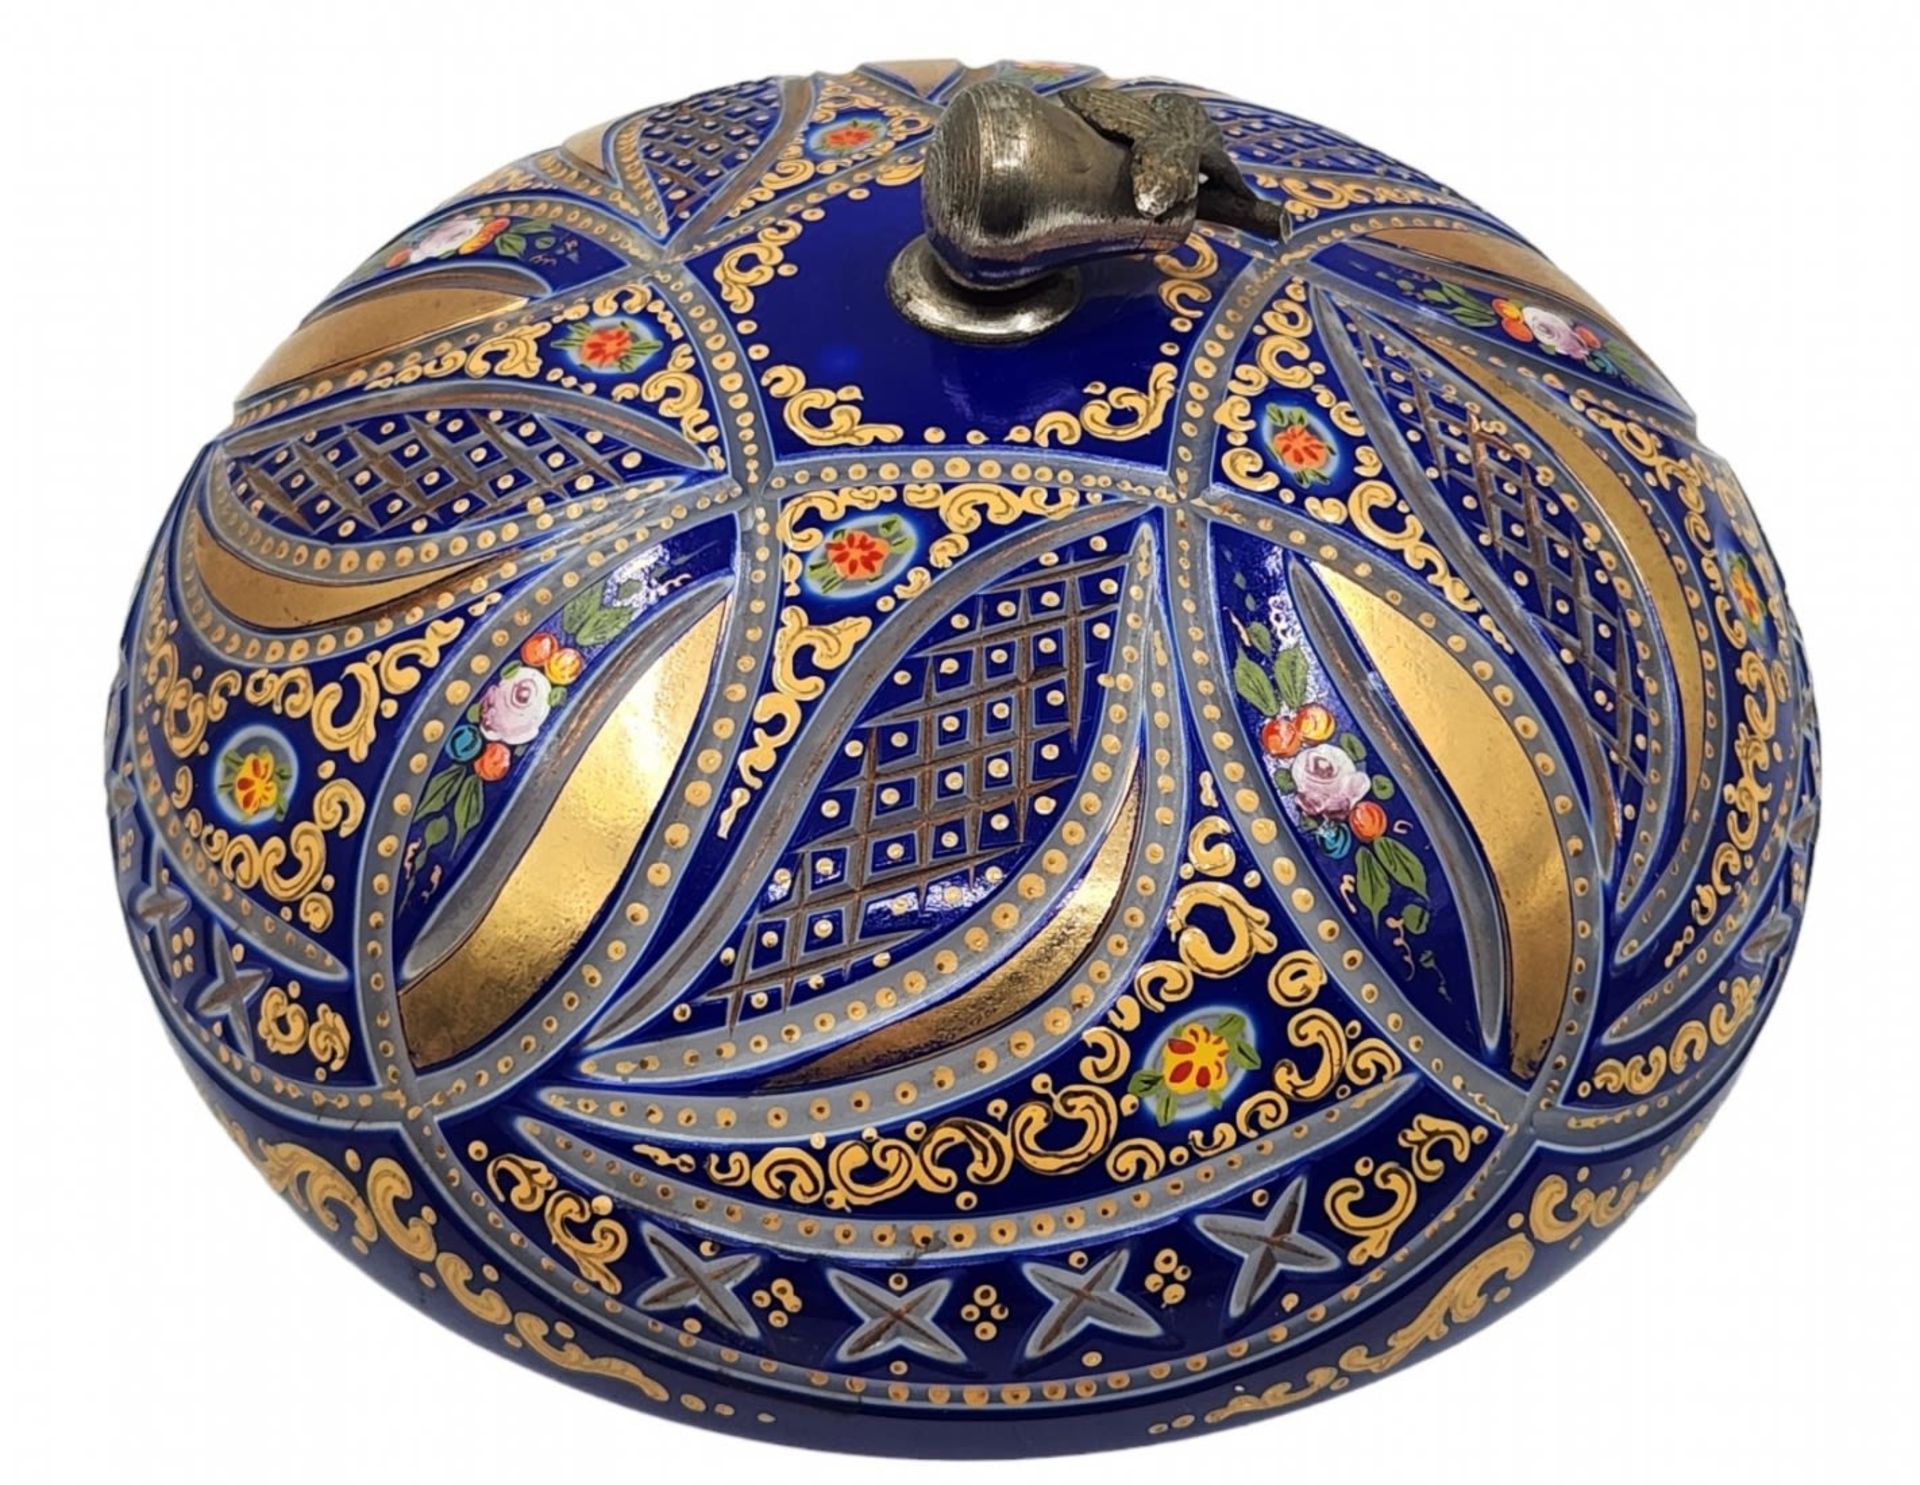 Ancient Bohemian vessel, a very high quality 19th century vessel created for the Ottoman market in - Image 13 of 14